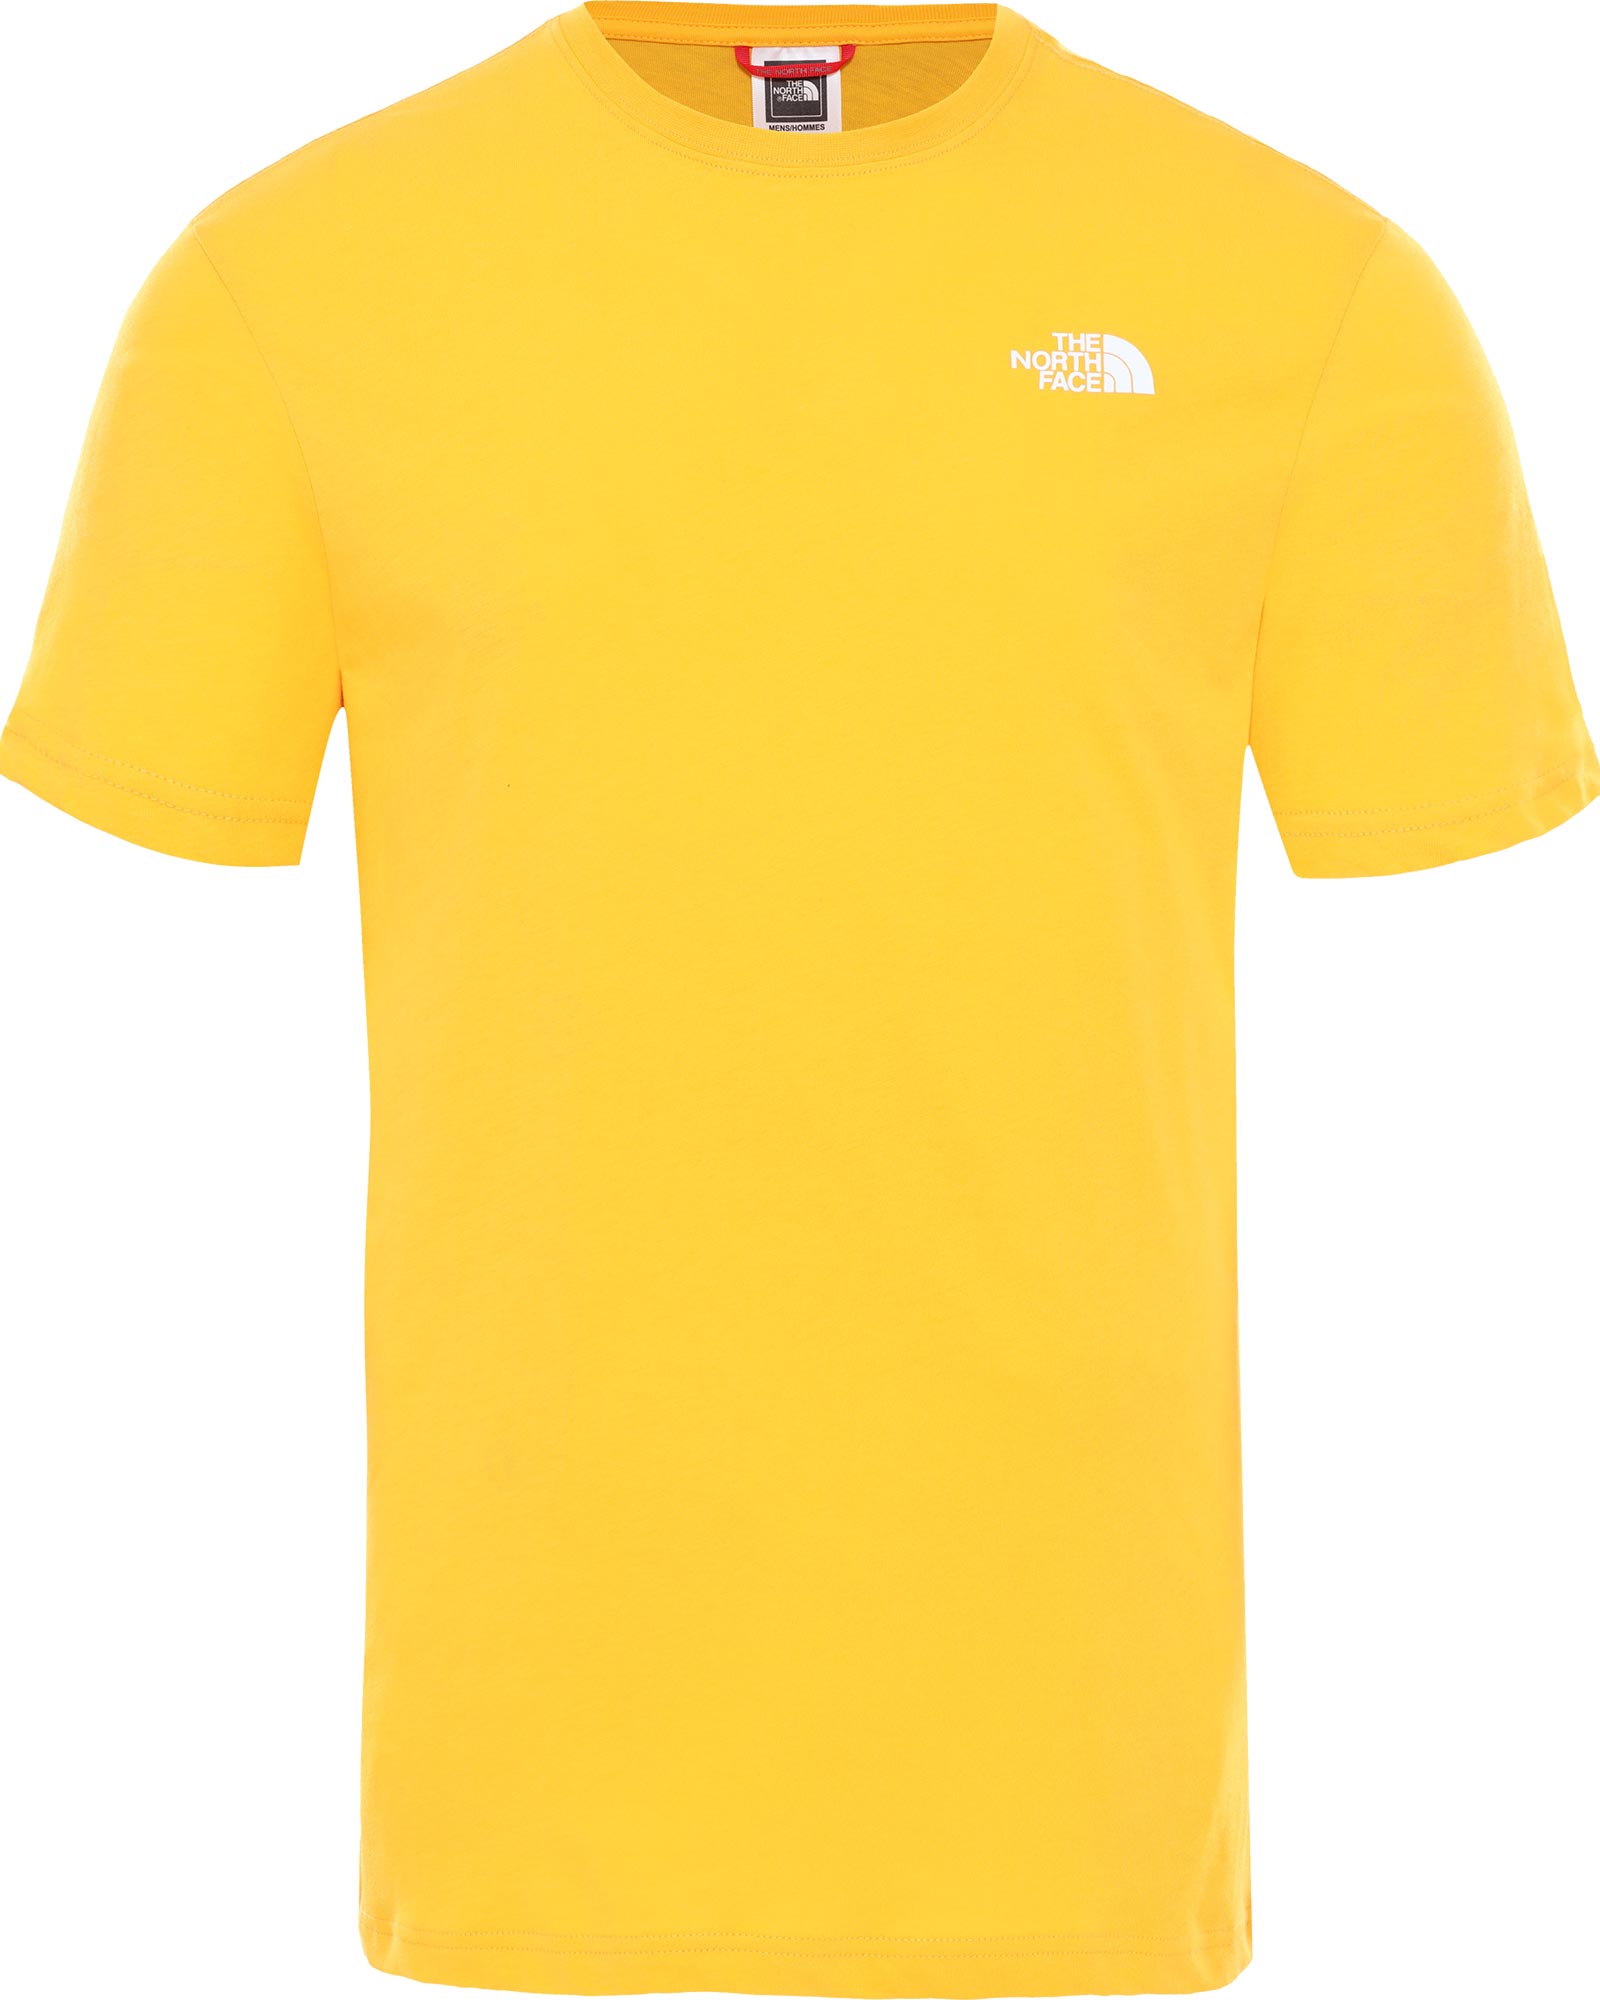 The North Face Red Box Men’s T Shirt - Summit Gold S